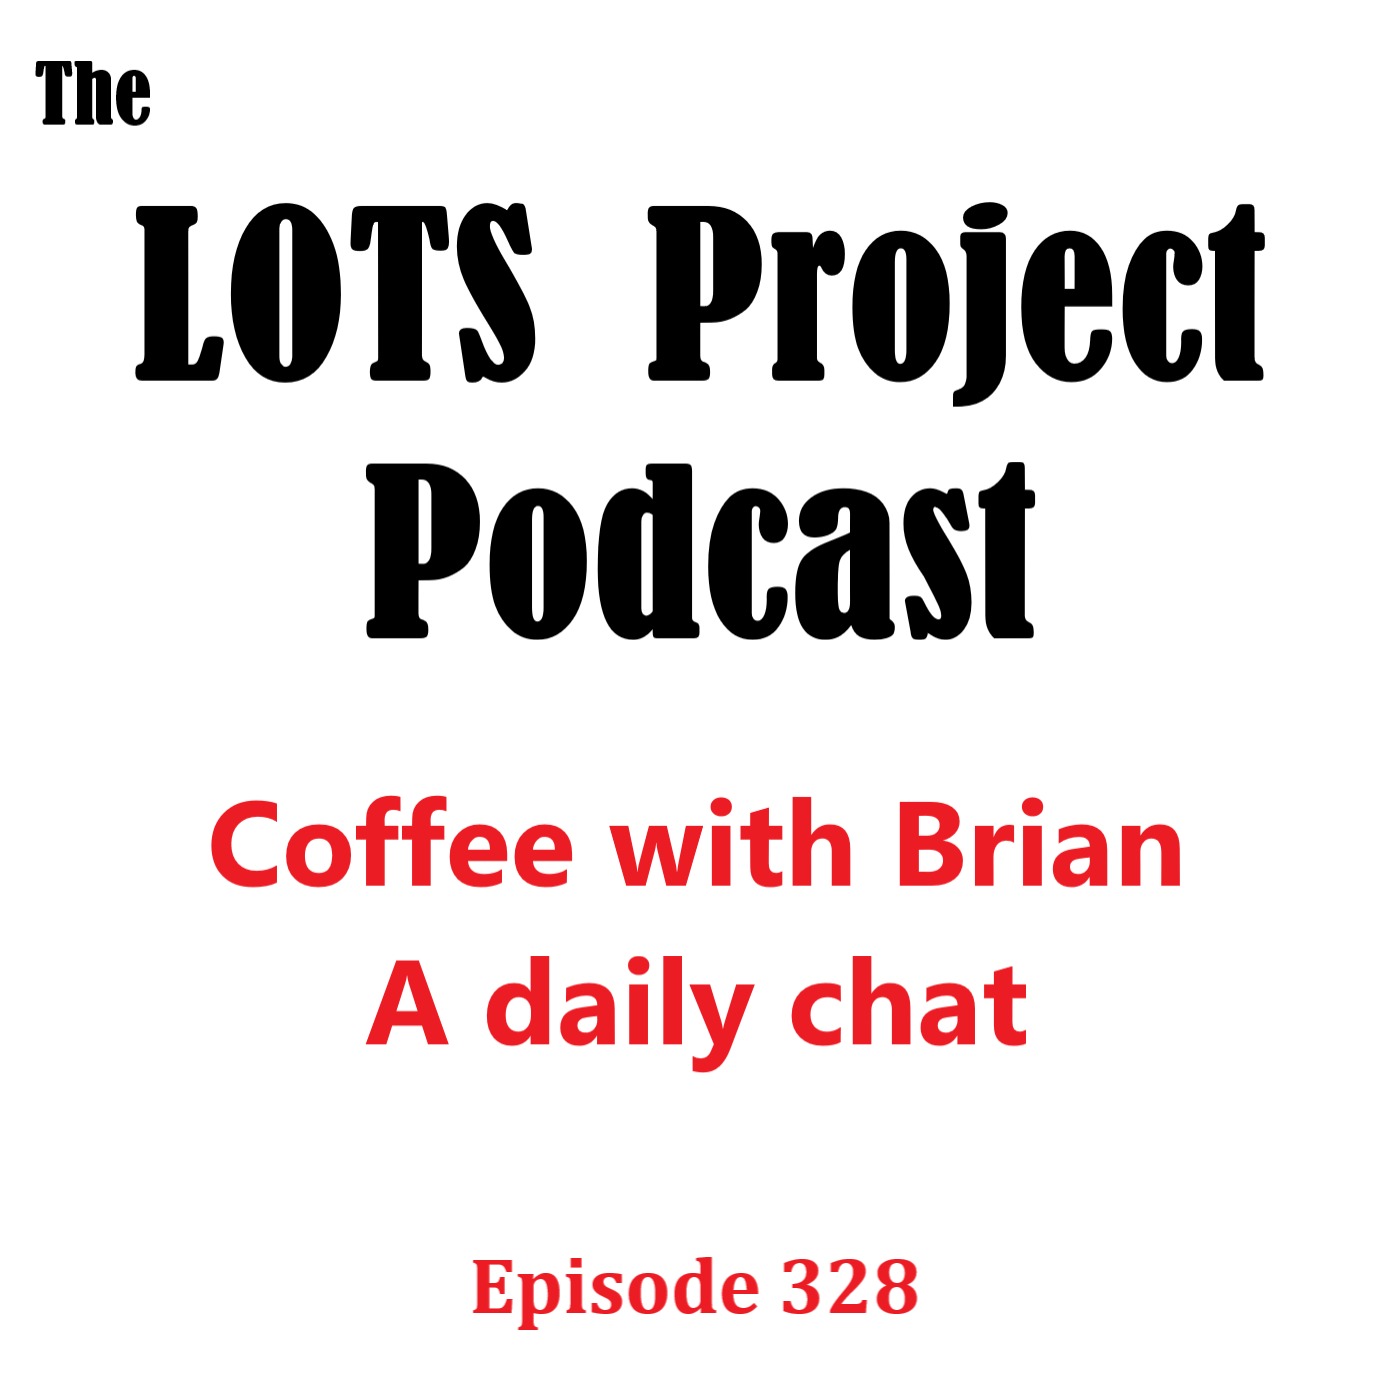 Episode 328 Coffee with Brian, A Daily Morning Chat #podcast #daily #nomad #coffee